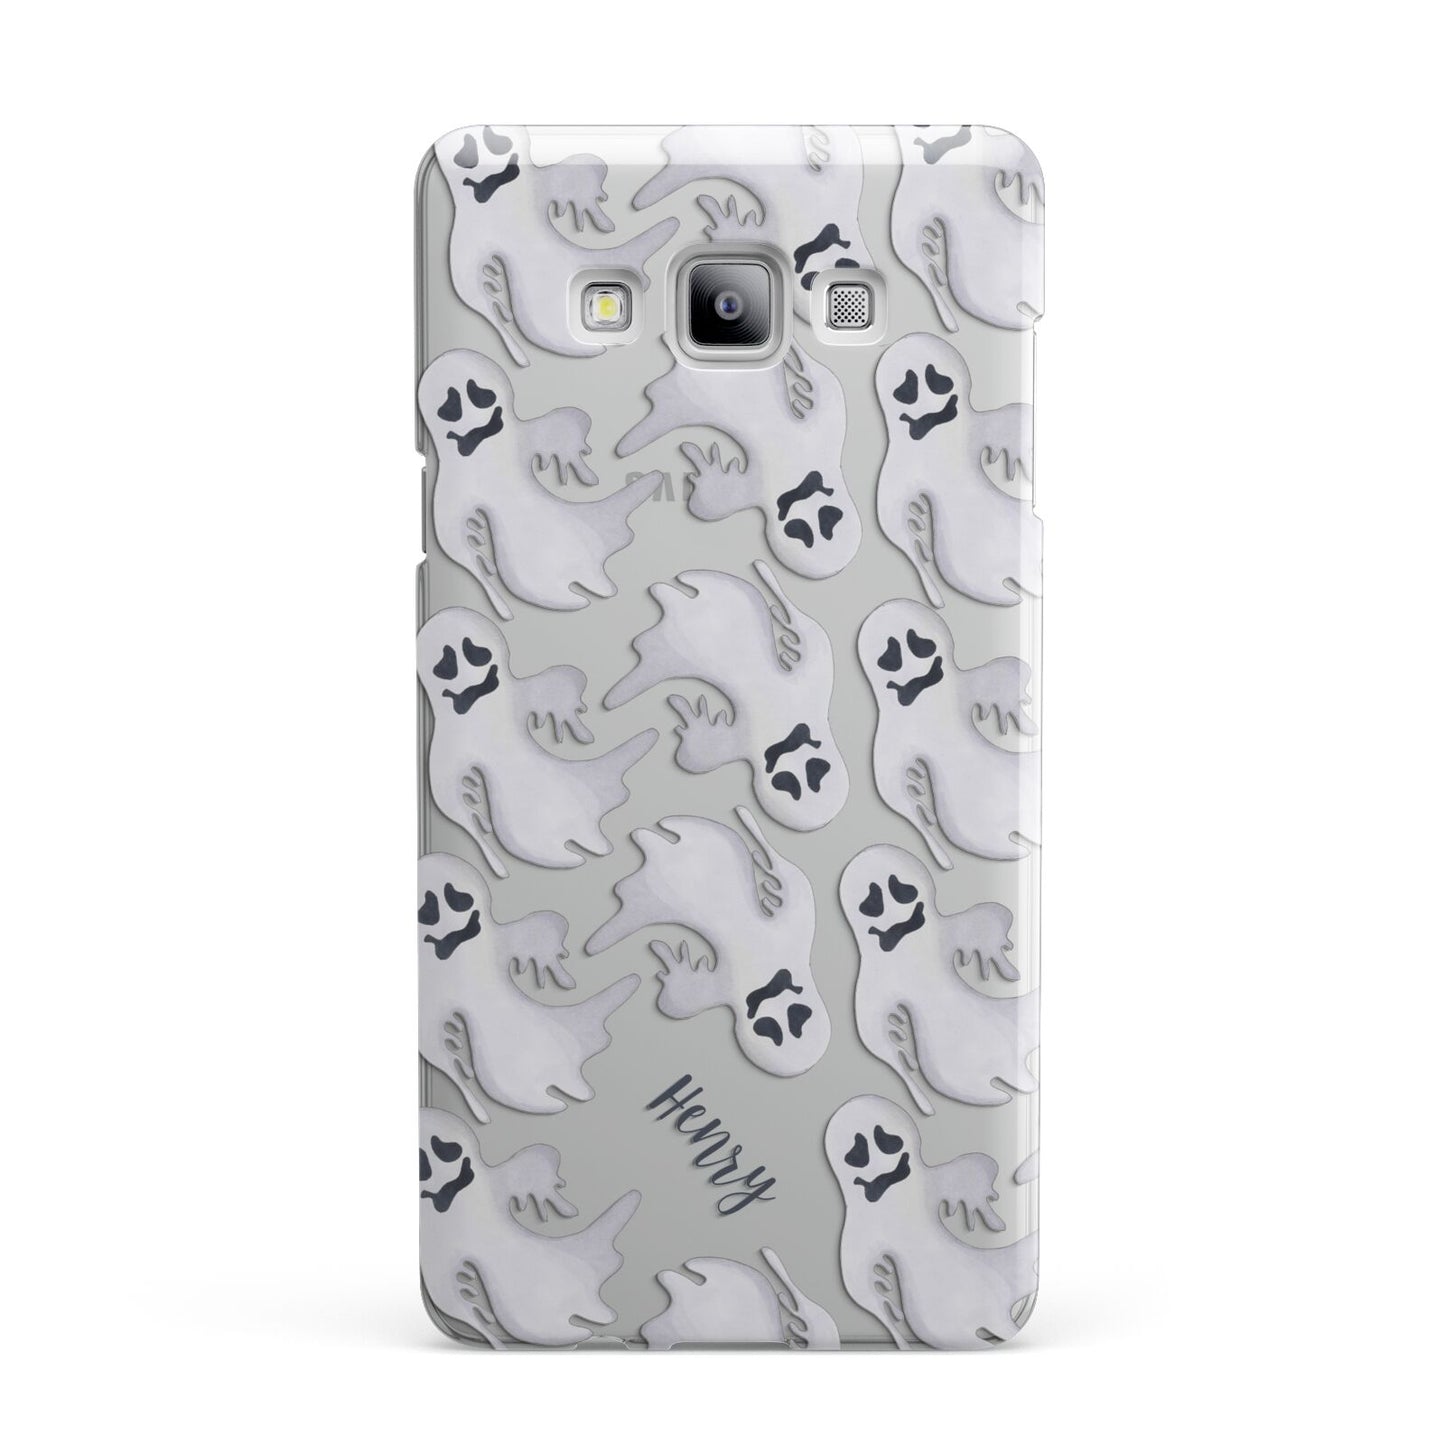 Floaty Ghosts Personalised Samsung Galaxy A7 2015 Case